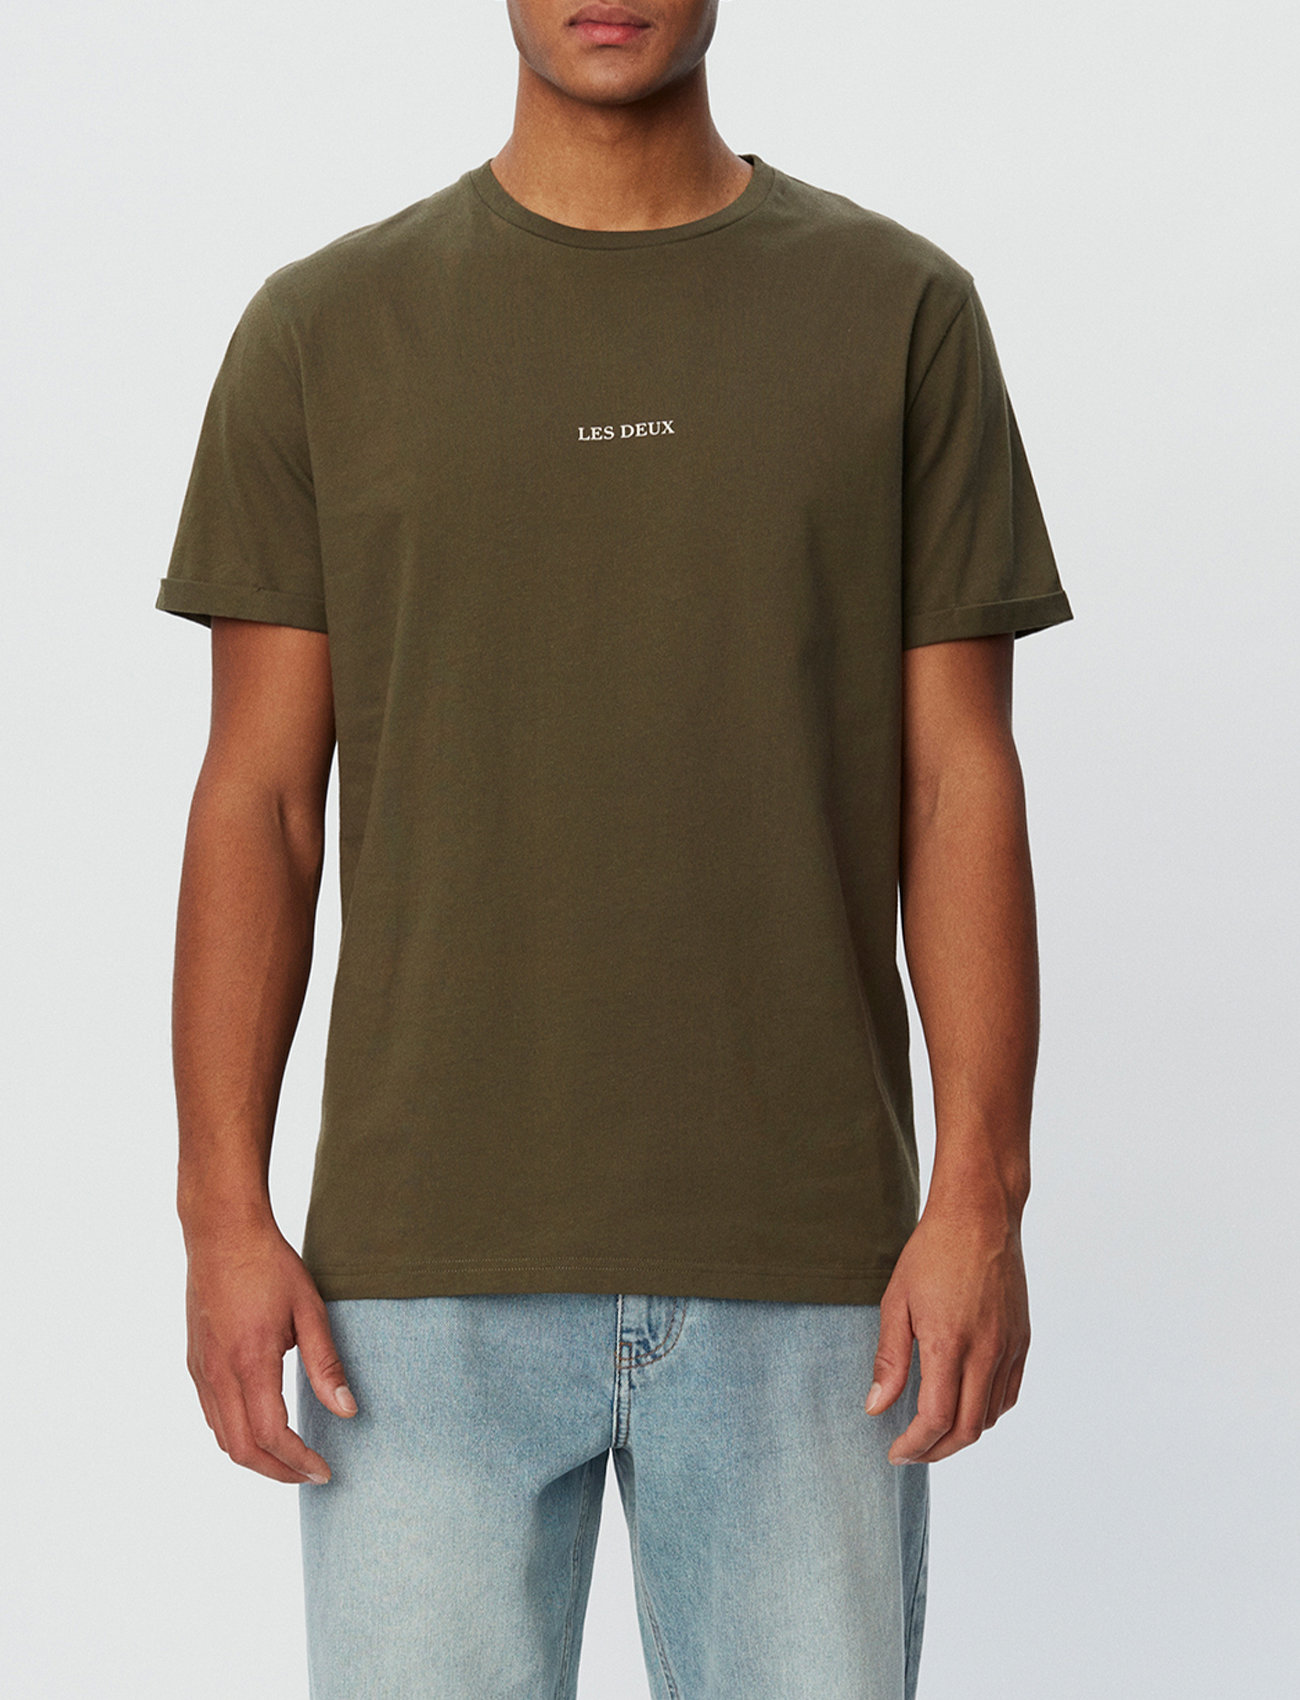 Les Deux - Lens T-Shirt - nordic style - olive night/ivory - 0